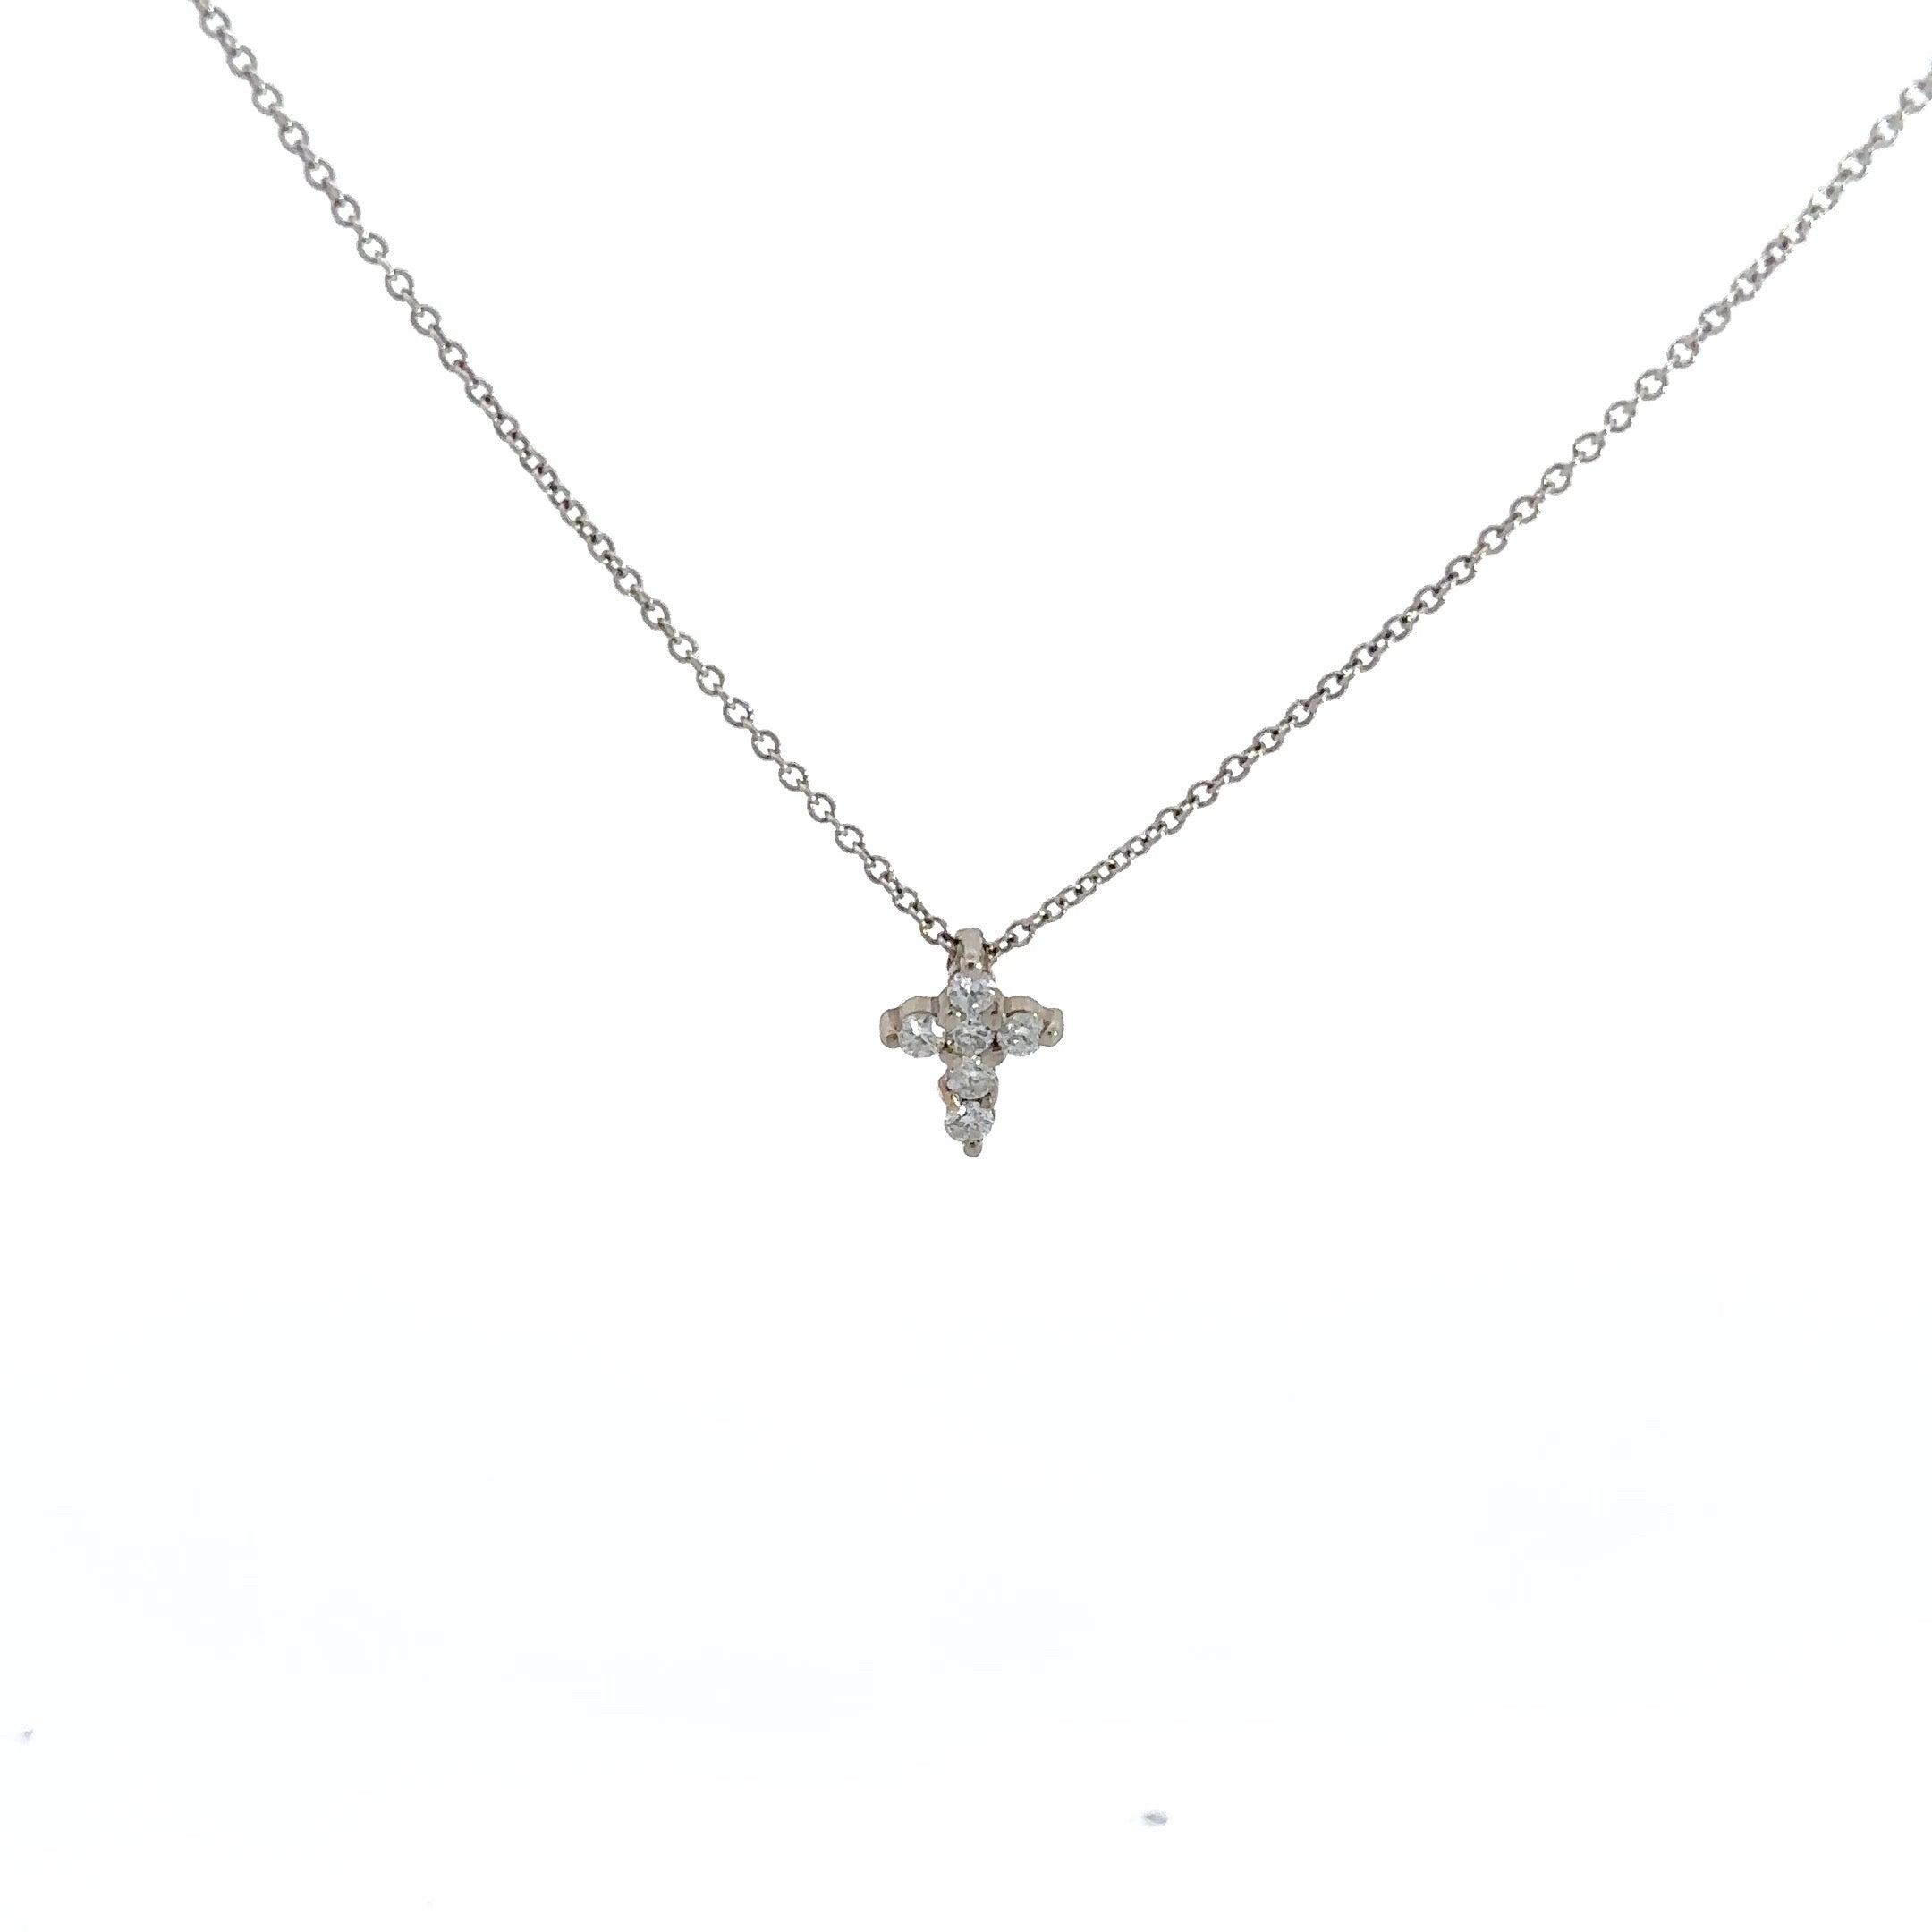 AD249 - 14kt gold Cross necklace